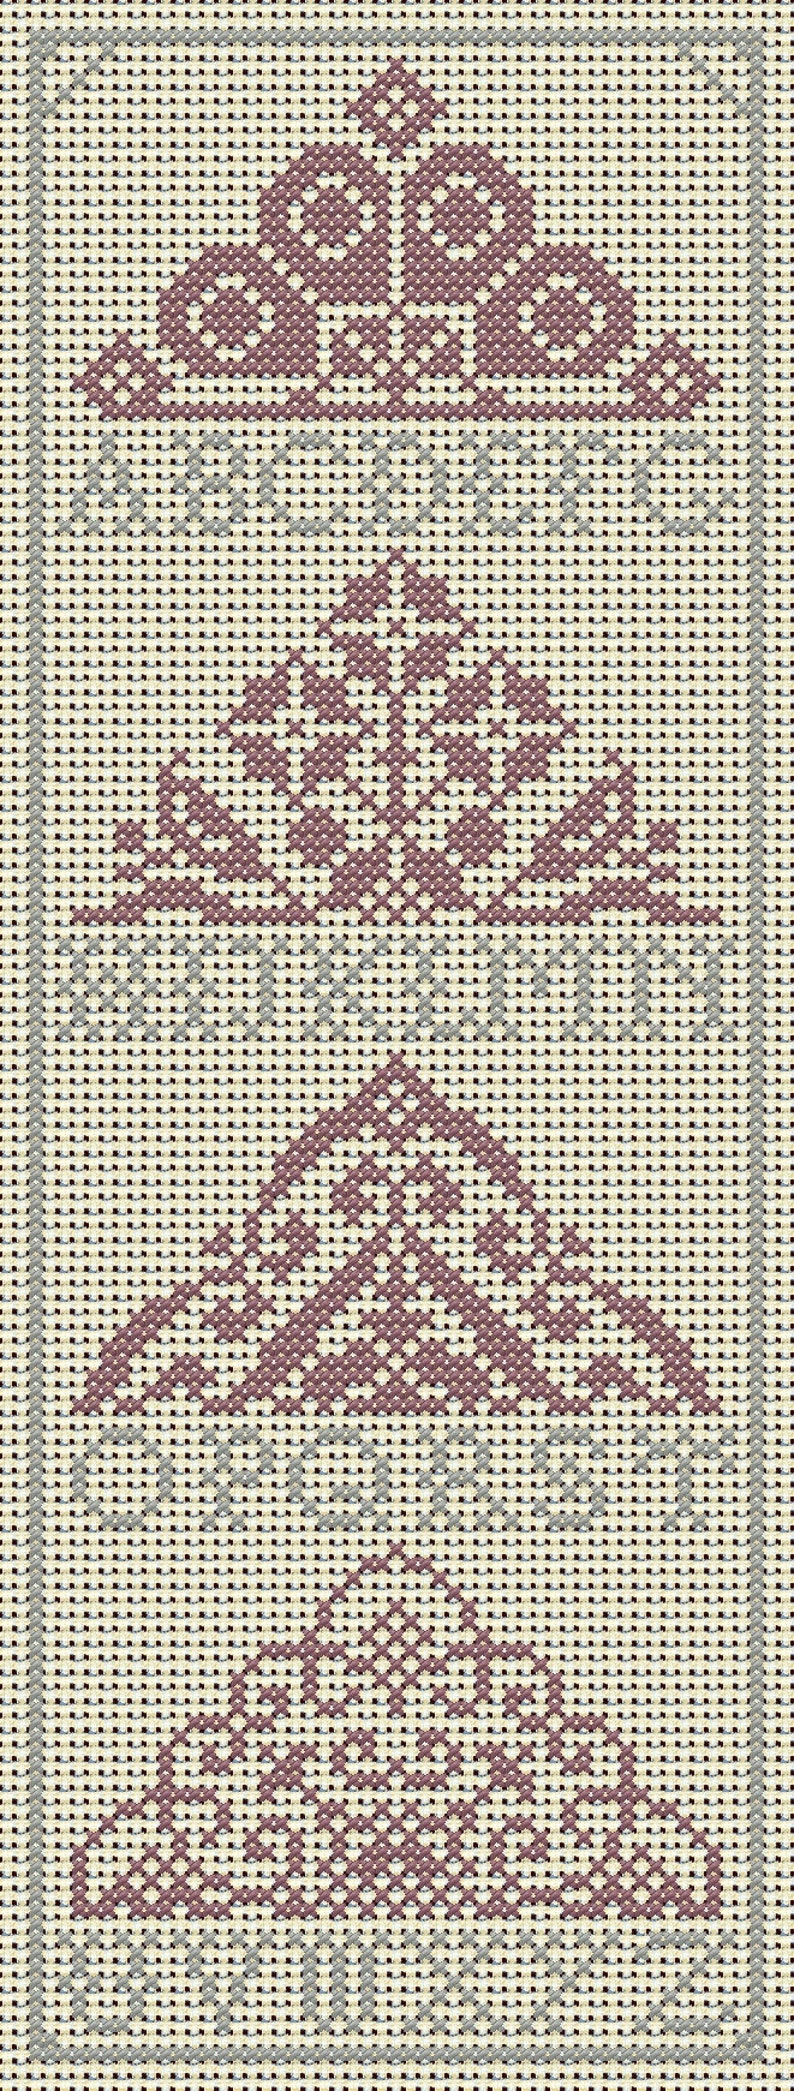 NEW BOOK Quaker Samplers in Cross Stitch PDF Book uses the beautiful medallion motifs and patterns to create lovely samplers to embroider image 8